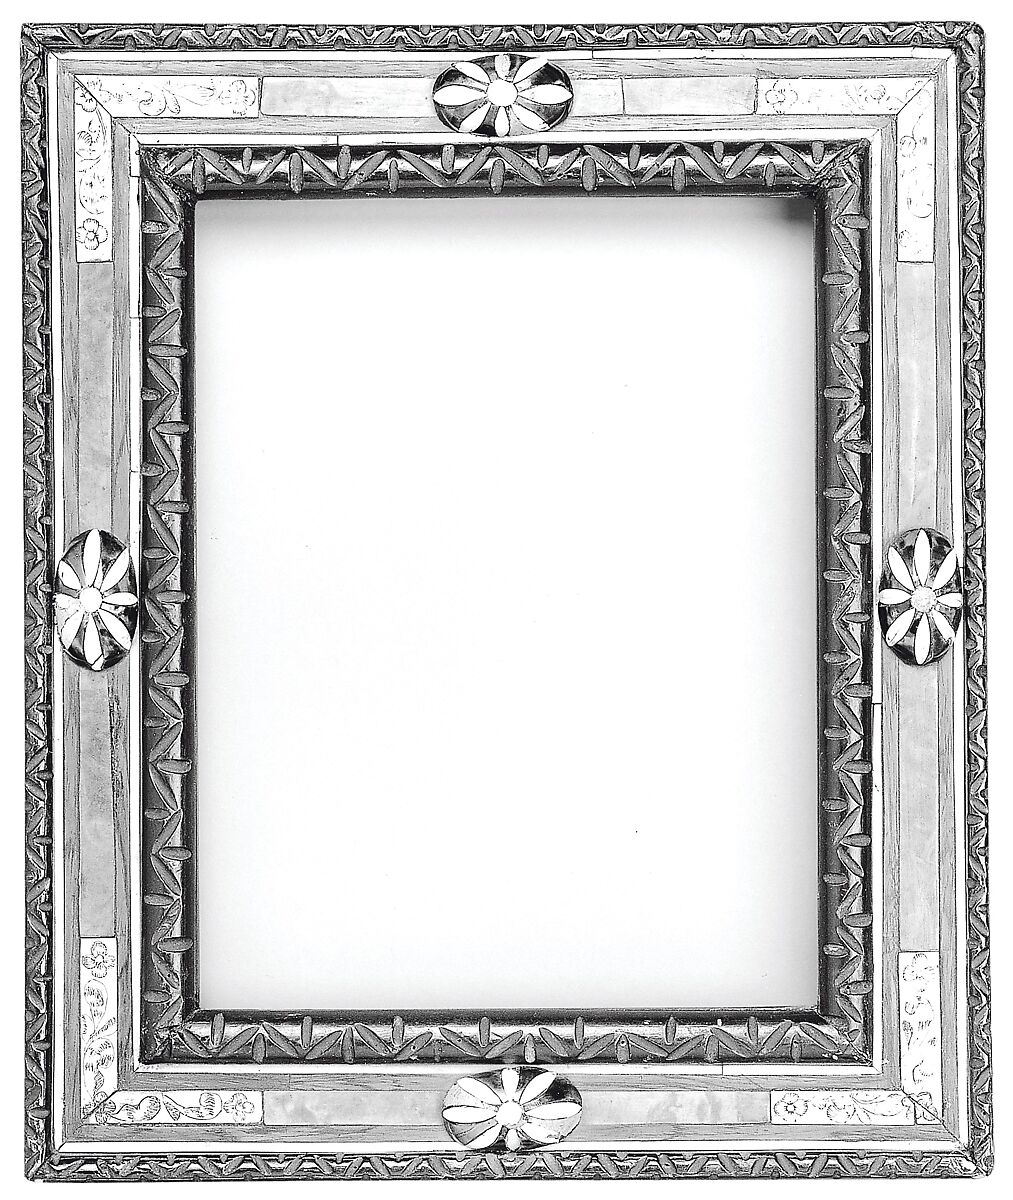 Cassetta frame, Basswood back frame with rosewood upper moldings and ivory, tortoiseshell, oak and maple veneers. Carved. Sight edge: simplified lotus leaf, ebonized. Frieze: ivory stringing, maple and oak veneer. Centers: oval bosses with ivory and tortoiseshell veneer. Corners: curled acanthus leaves and paterae engraved on ivory., American, New York (?) 